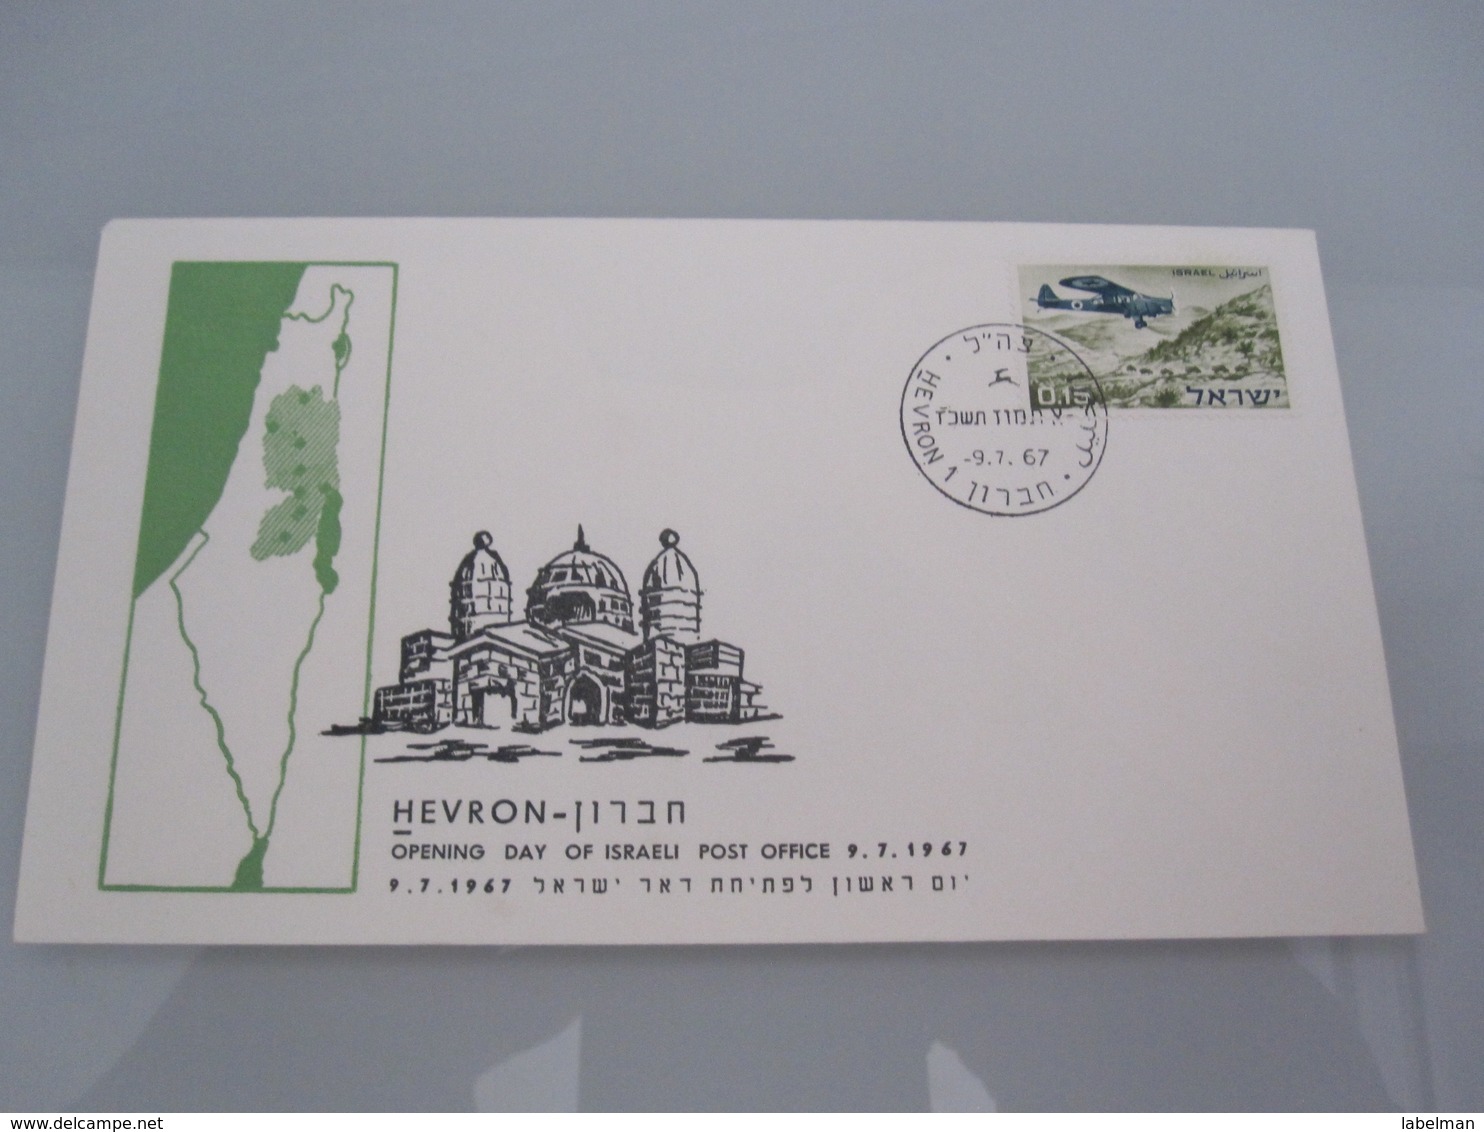 1967 POO FIRST DAY POST OFFICE OPENING HEVRON HEBRON PALESTINE ISRAEL MILITARY ADMINISTRATION ENVELOPE COVER CACHET MAP - Covers & Documents